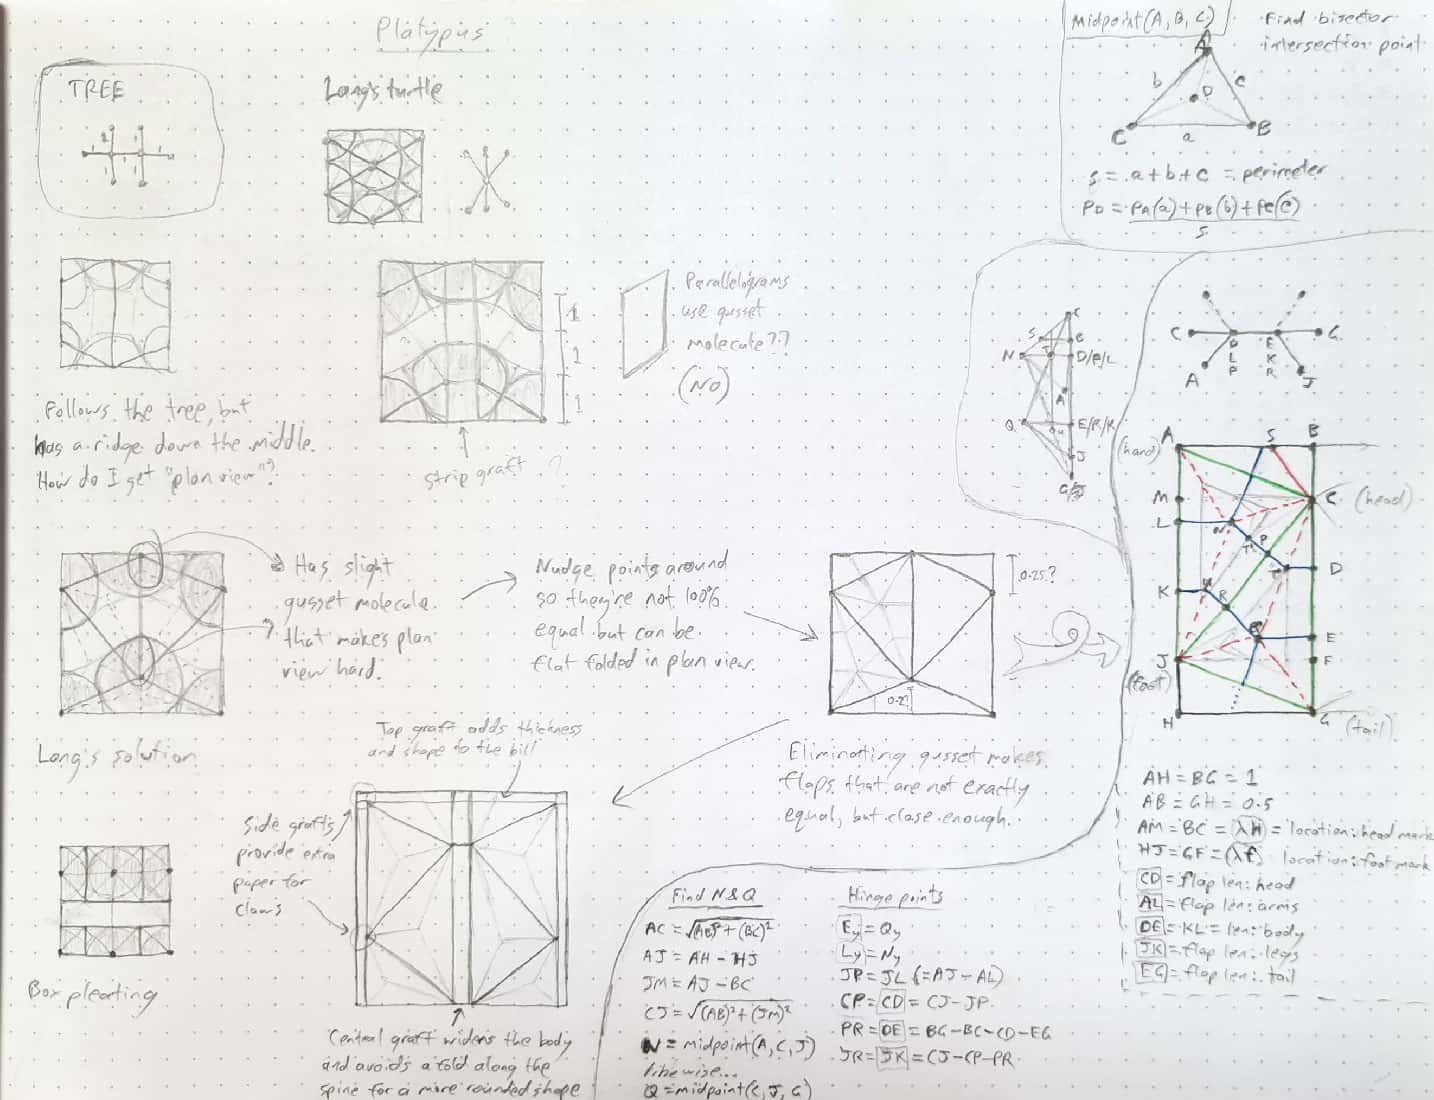 Hand-drawn sketches exploring various ideas for crease patterns